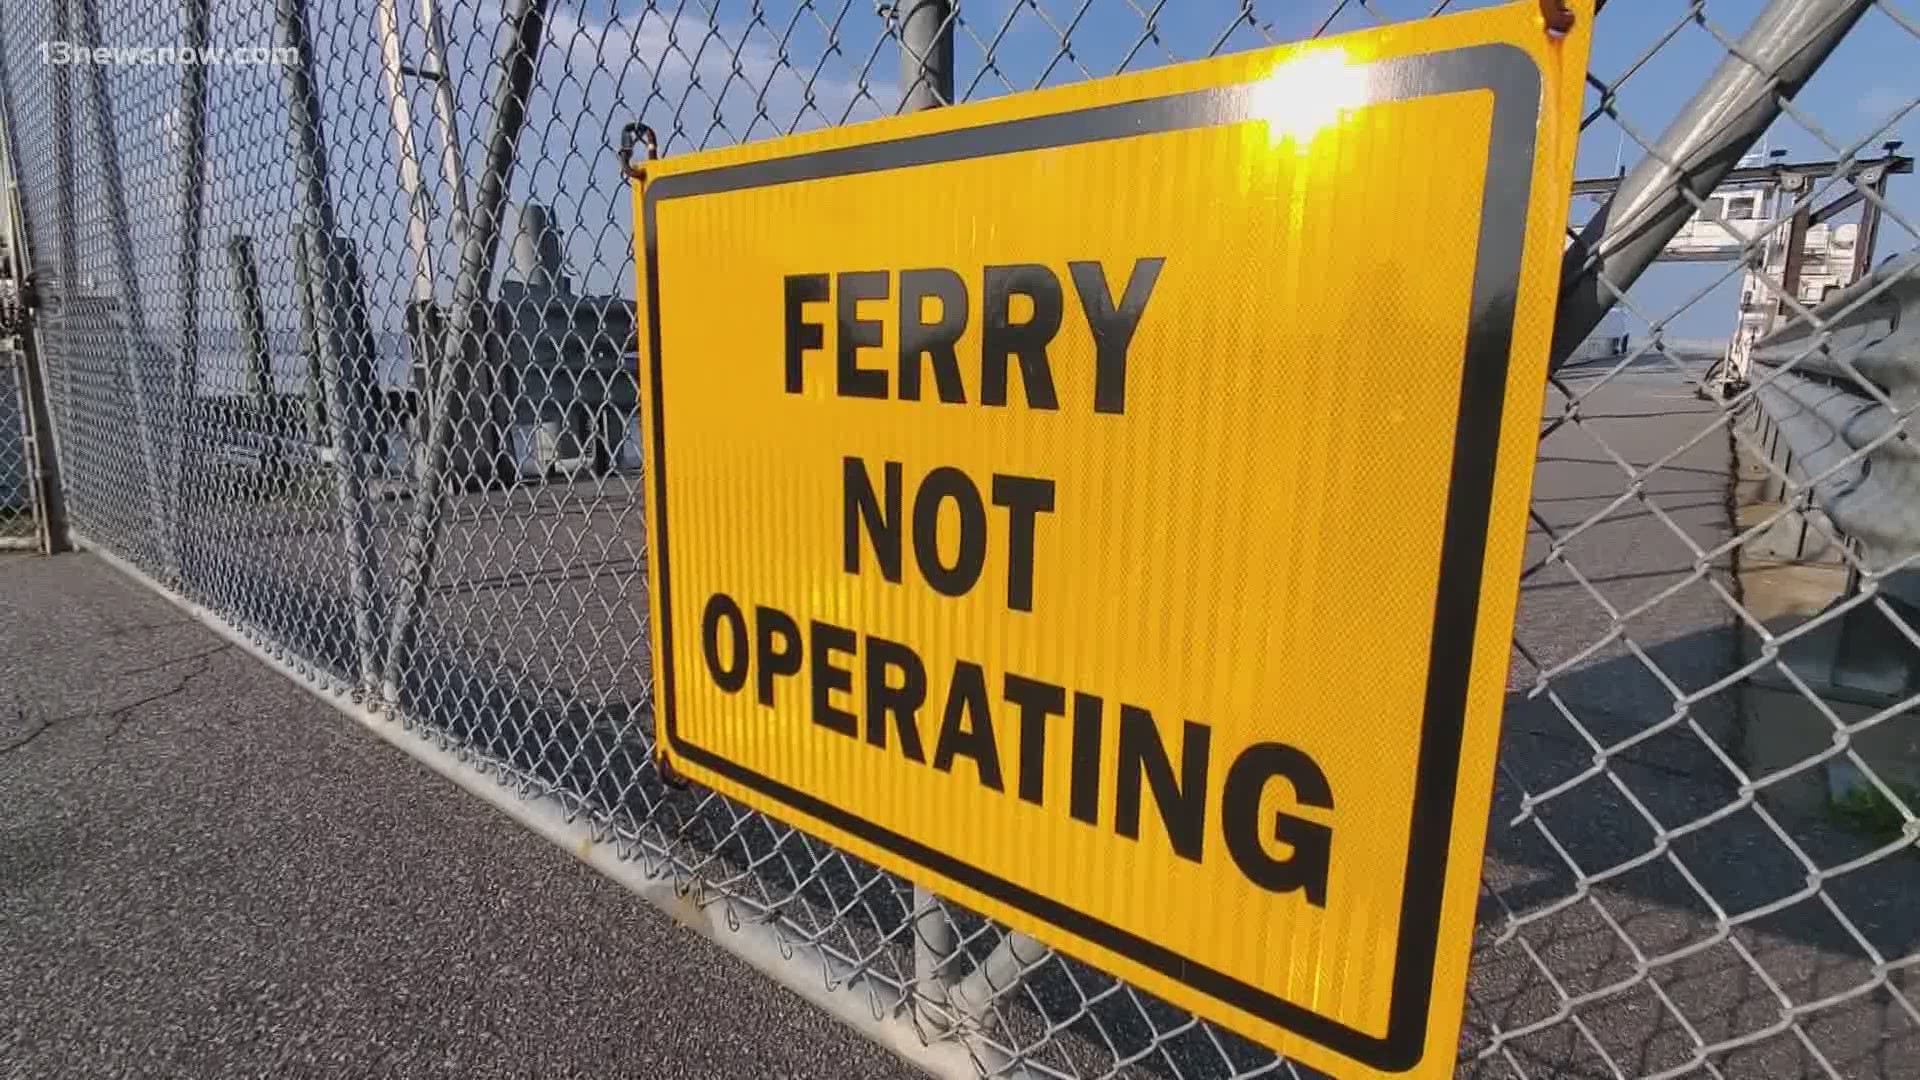 The North Carolina Department of Transportation is shutting down a ferry route for a few days to reallocate workers.